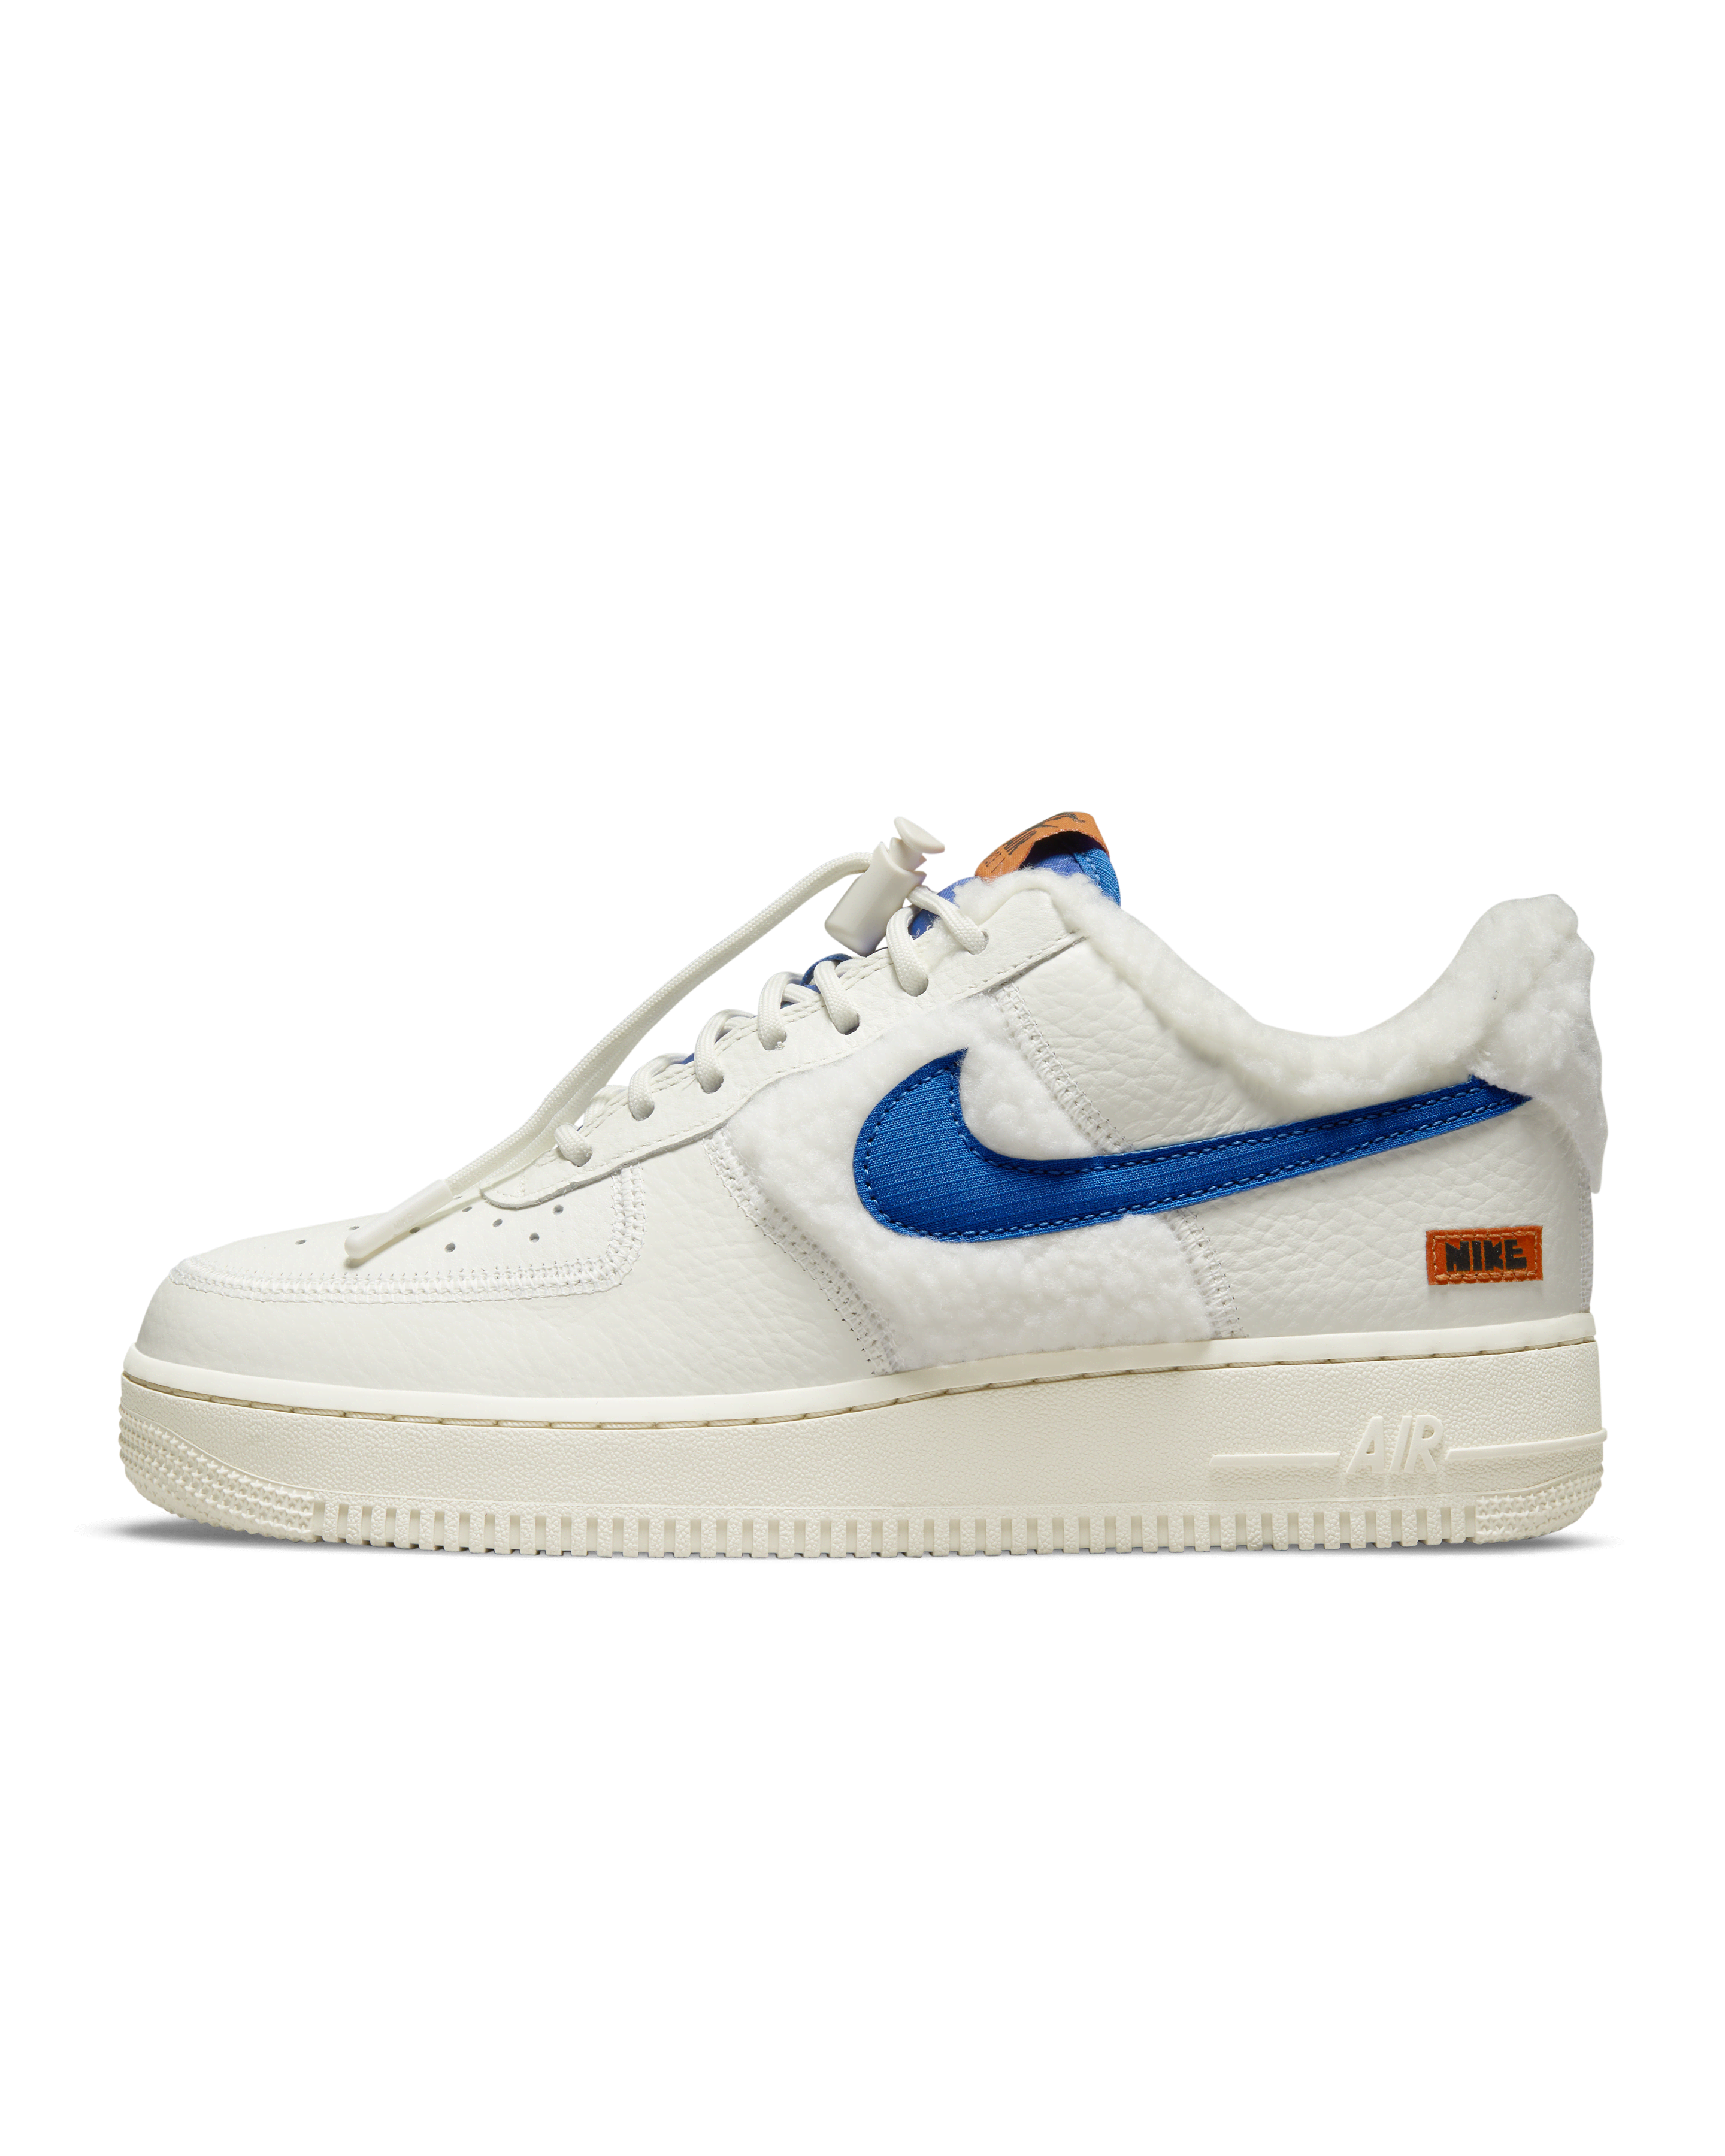 Espadrille Air Force 1 Sneaker With Nike